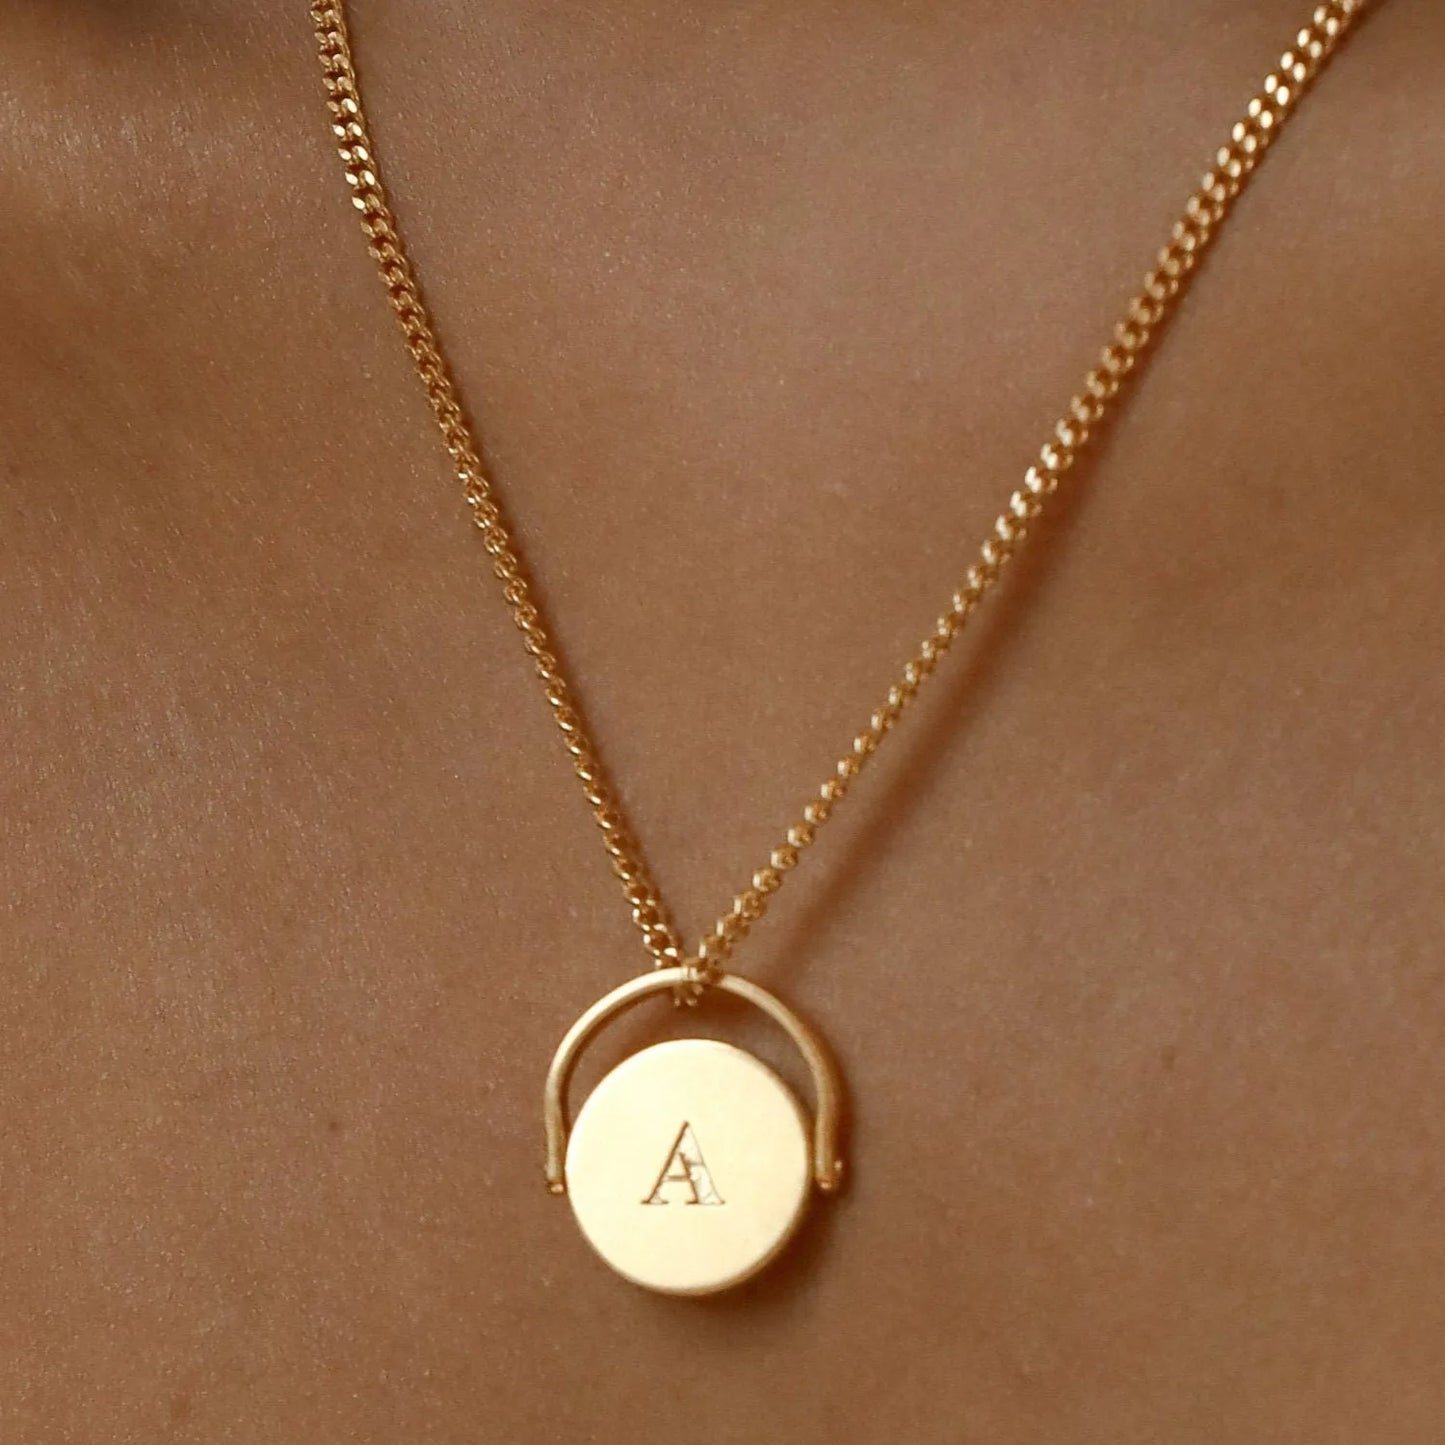 Stainless Steel 26 Initial Letters Necklace for Women Gold Plated Oval Pendant Necklace Wedding Party Jewelry